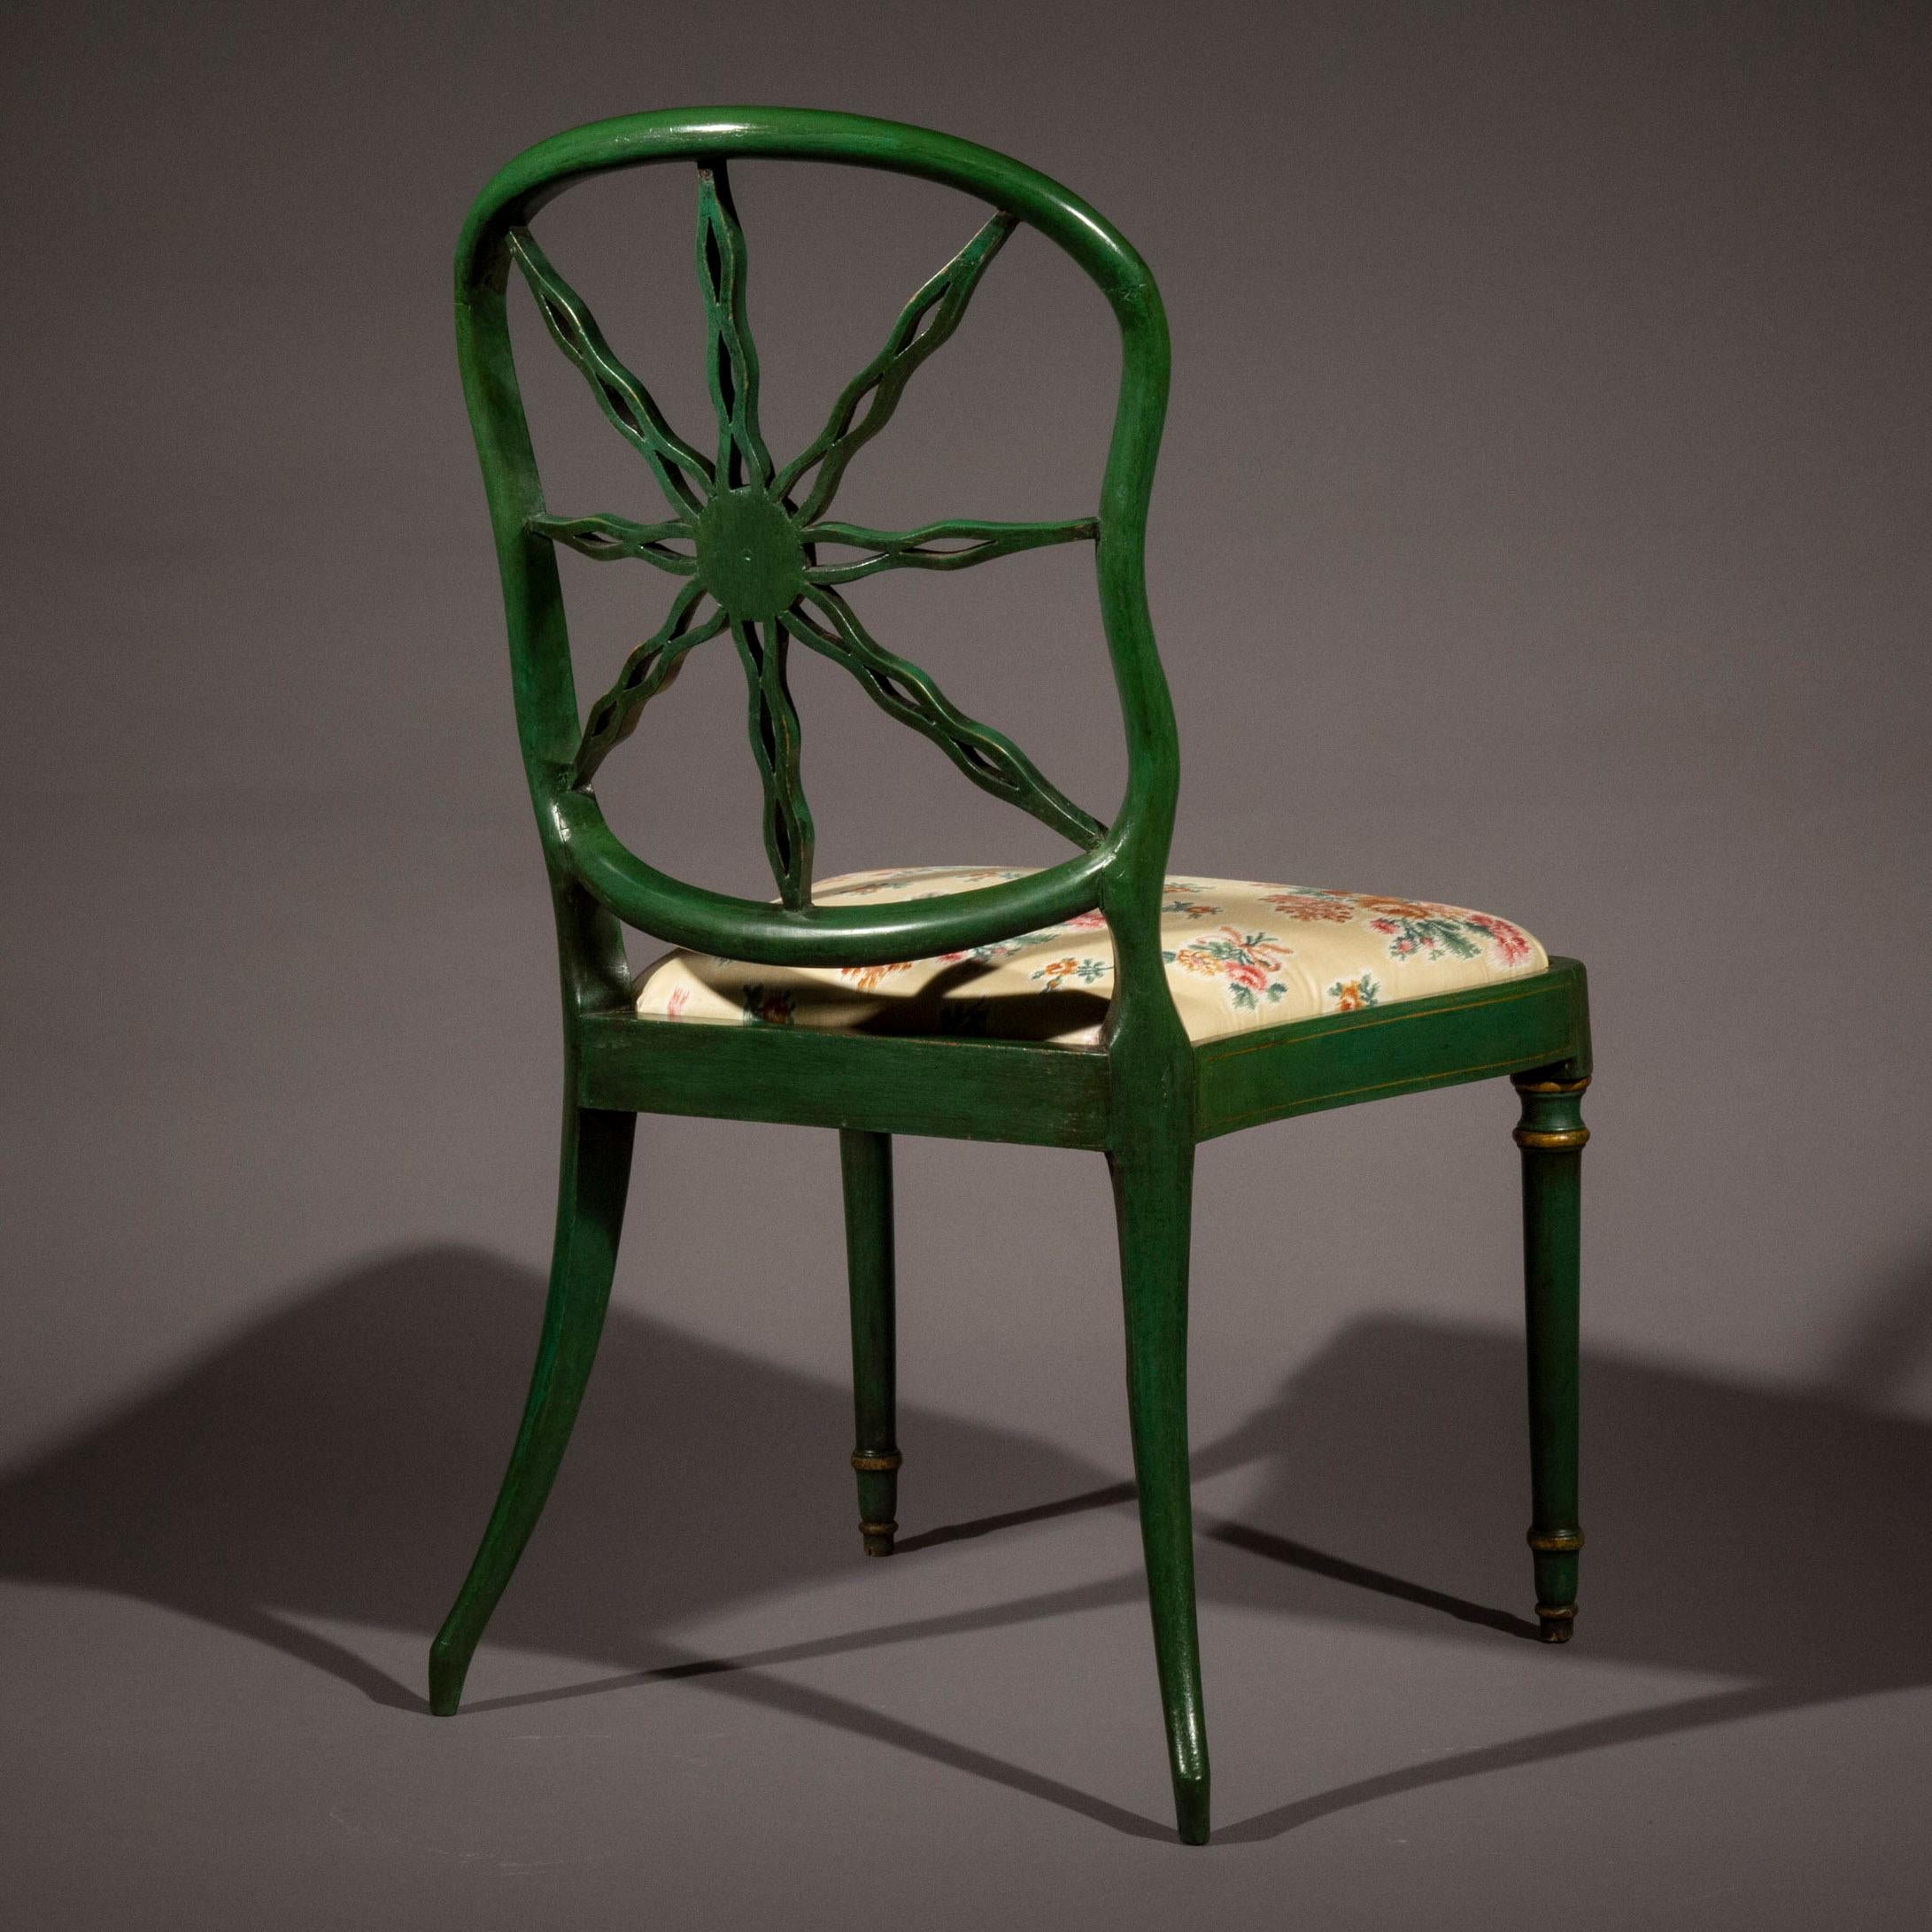 Pair of Antique Green Painted Chairs - 3 pairs available 1